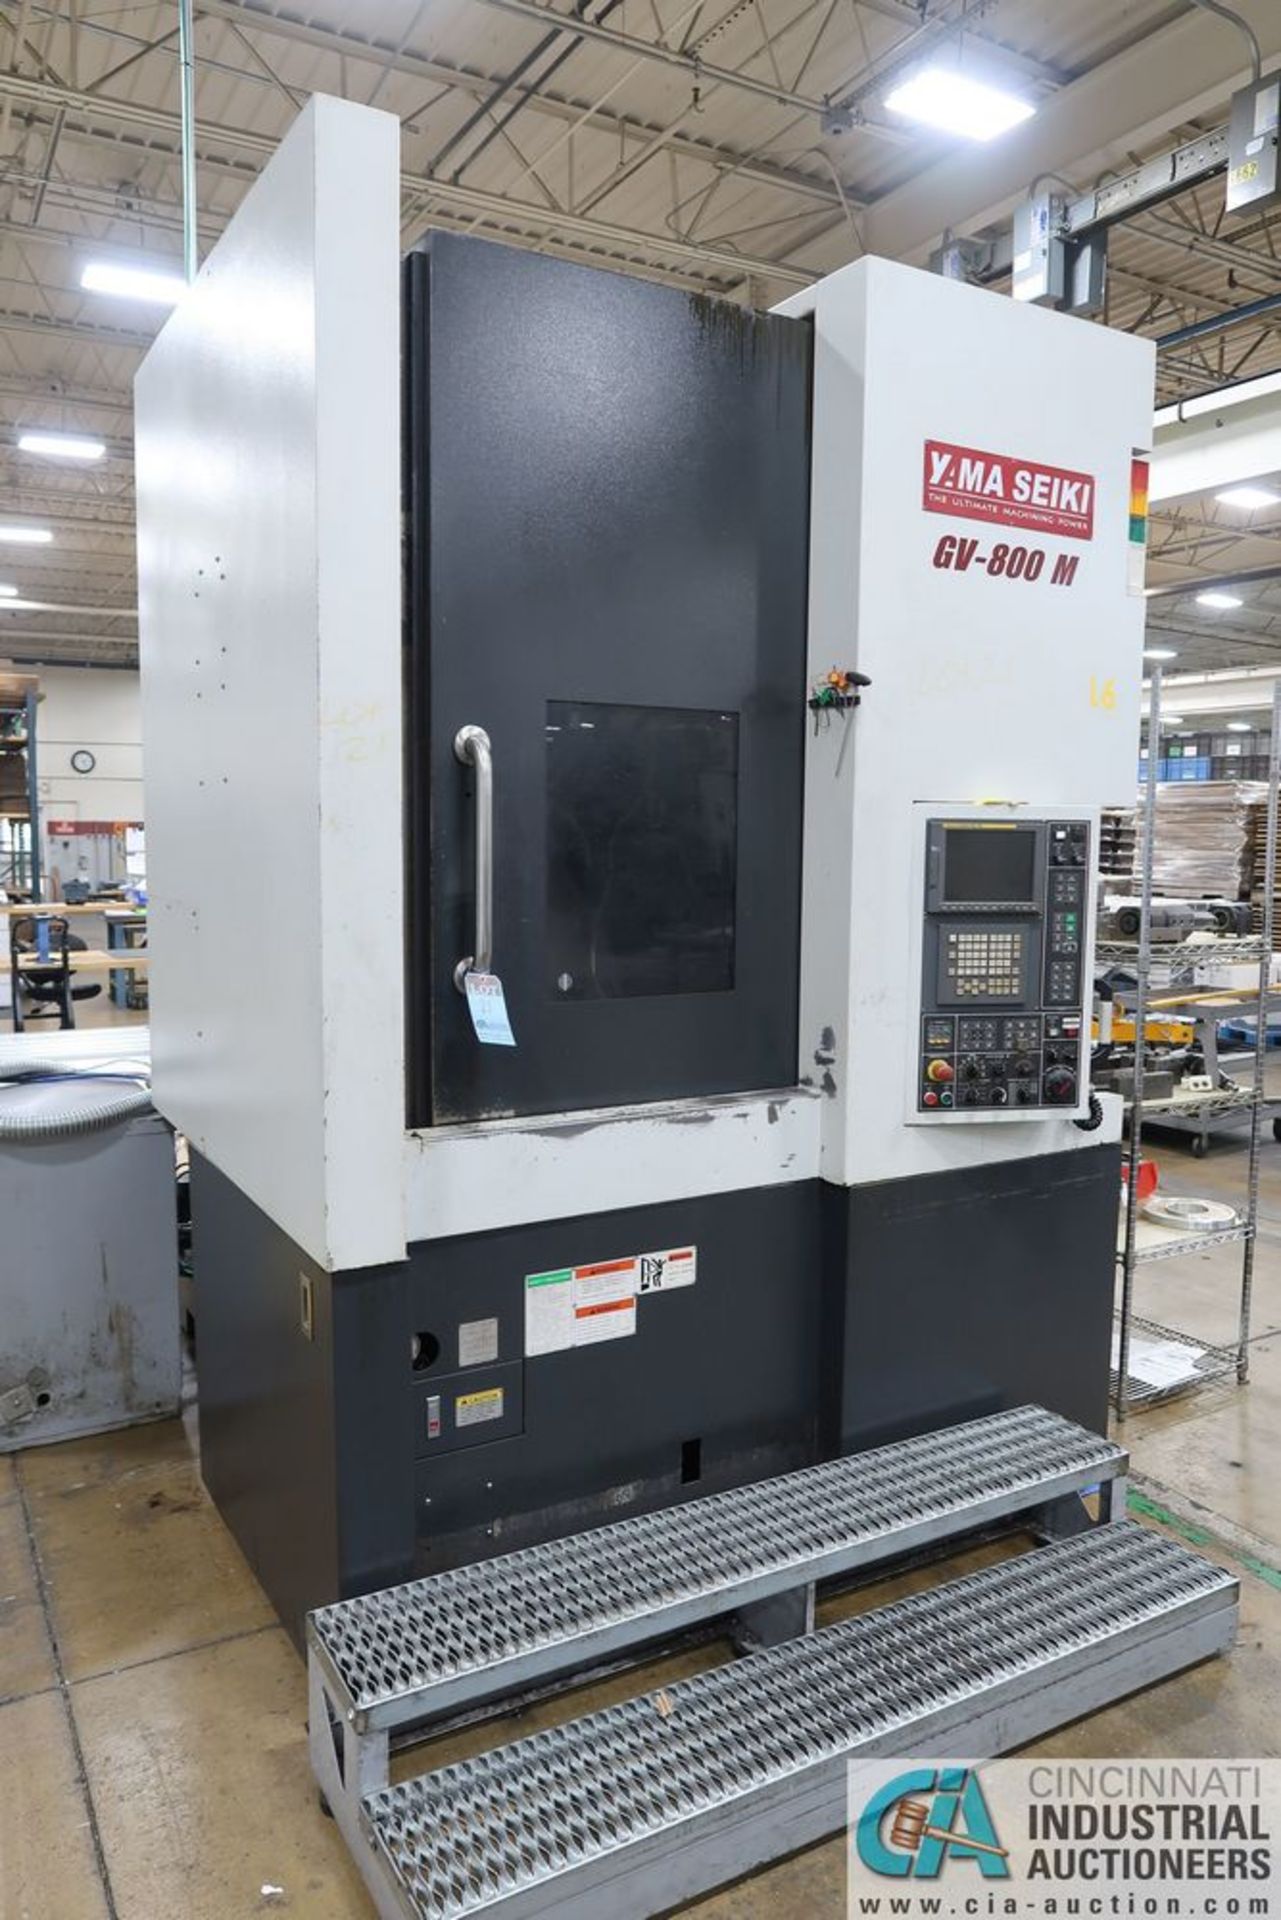 18" YAMA SEIKI MODEL GV-800M CNC VERTICAL TURRET LATHE WITH LIVE TOOLING; S/N 96F003 **Loading